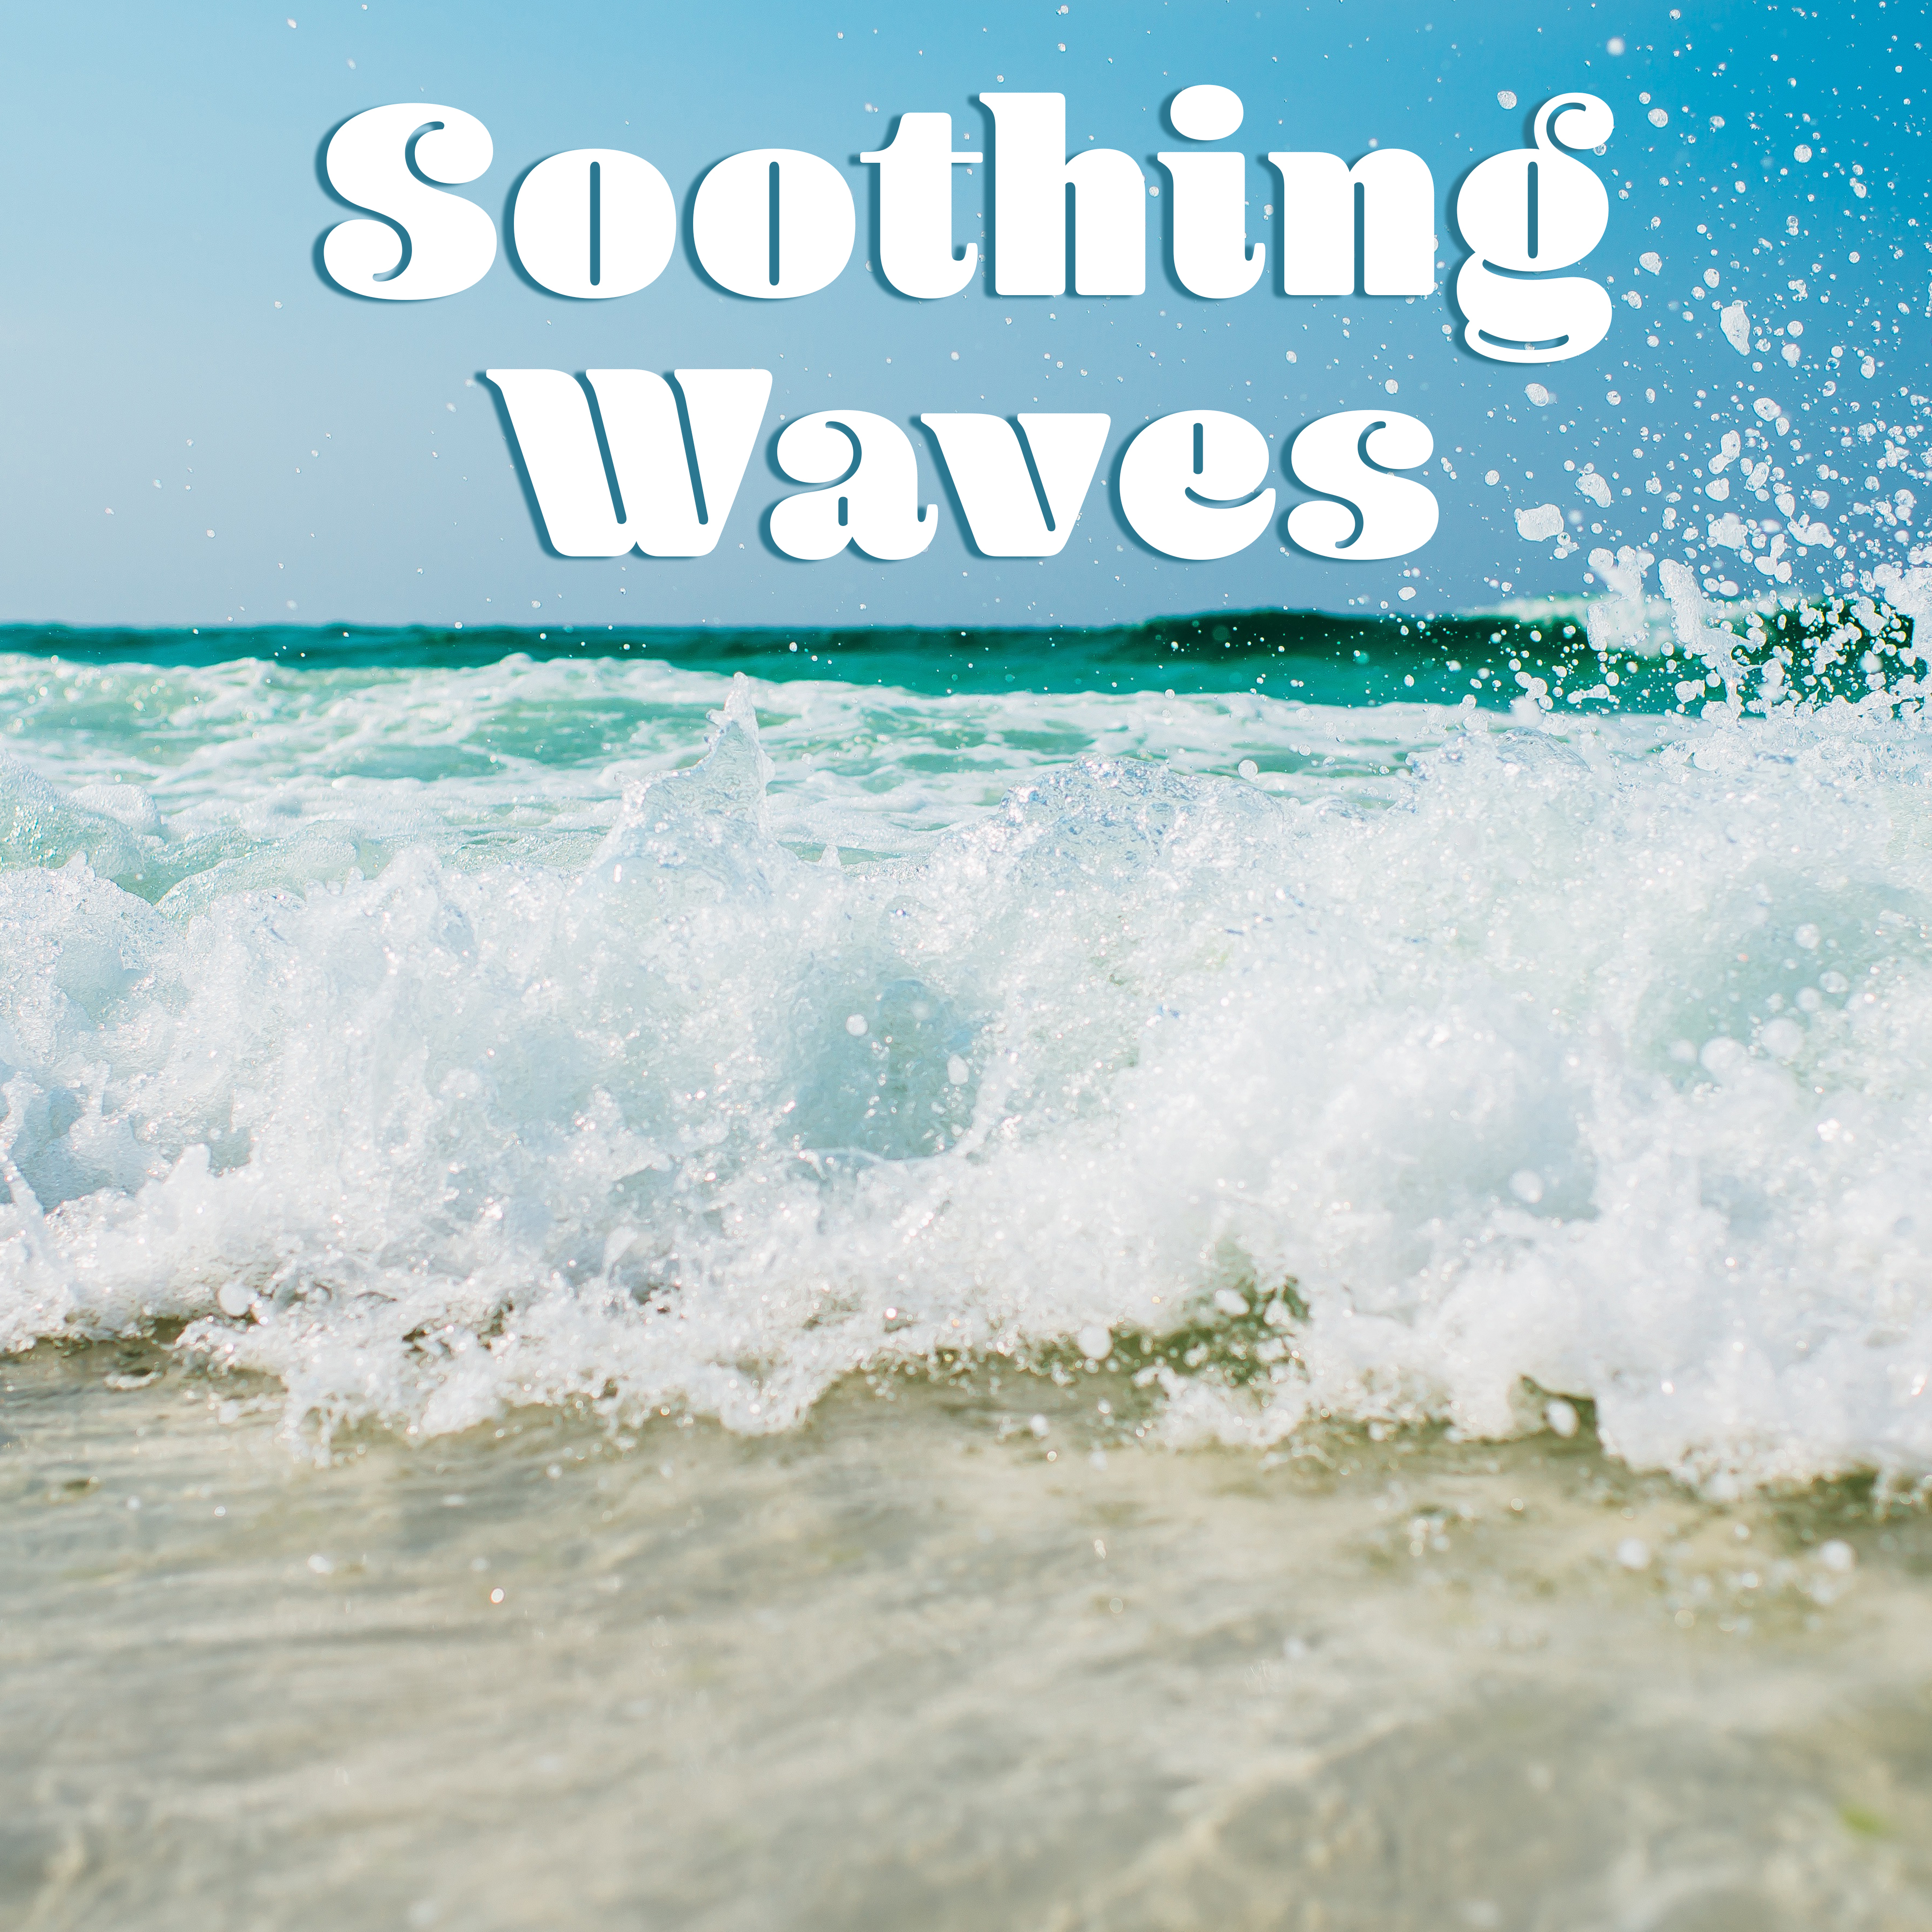 Soothing Waves – Ocean Dreams, Sounds of Sea, Peaceful Mind, Healing Music to Calm Down, Pure Sleep, Relax